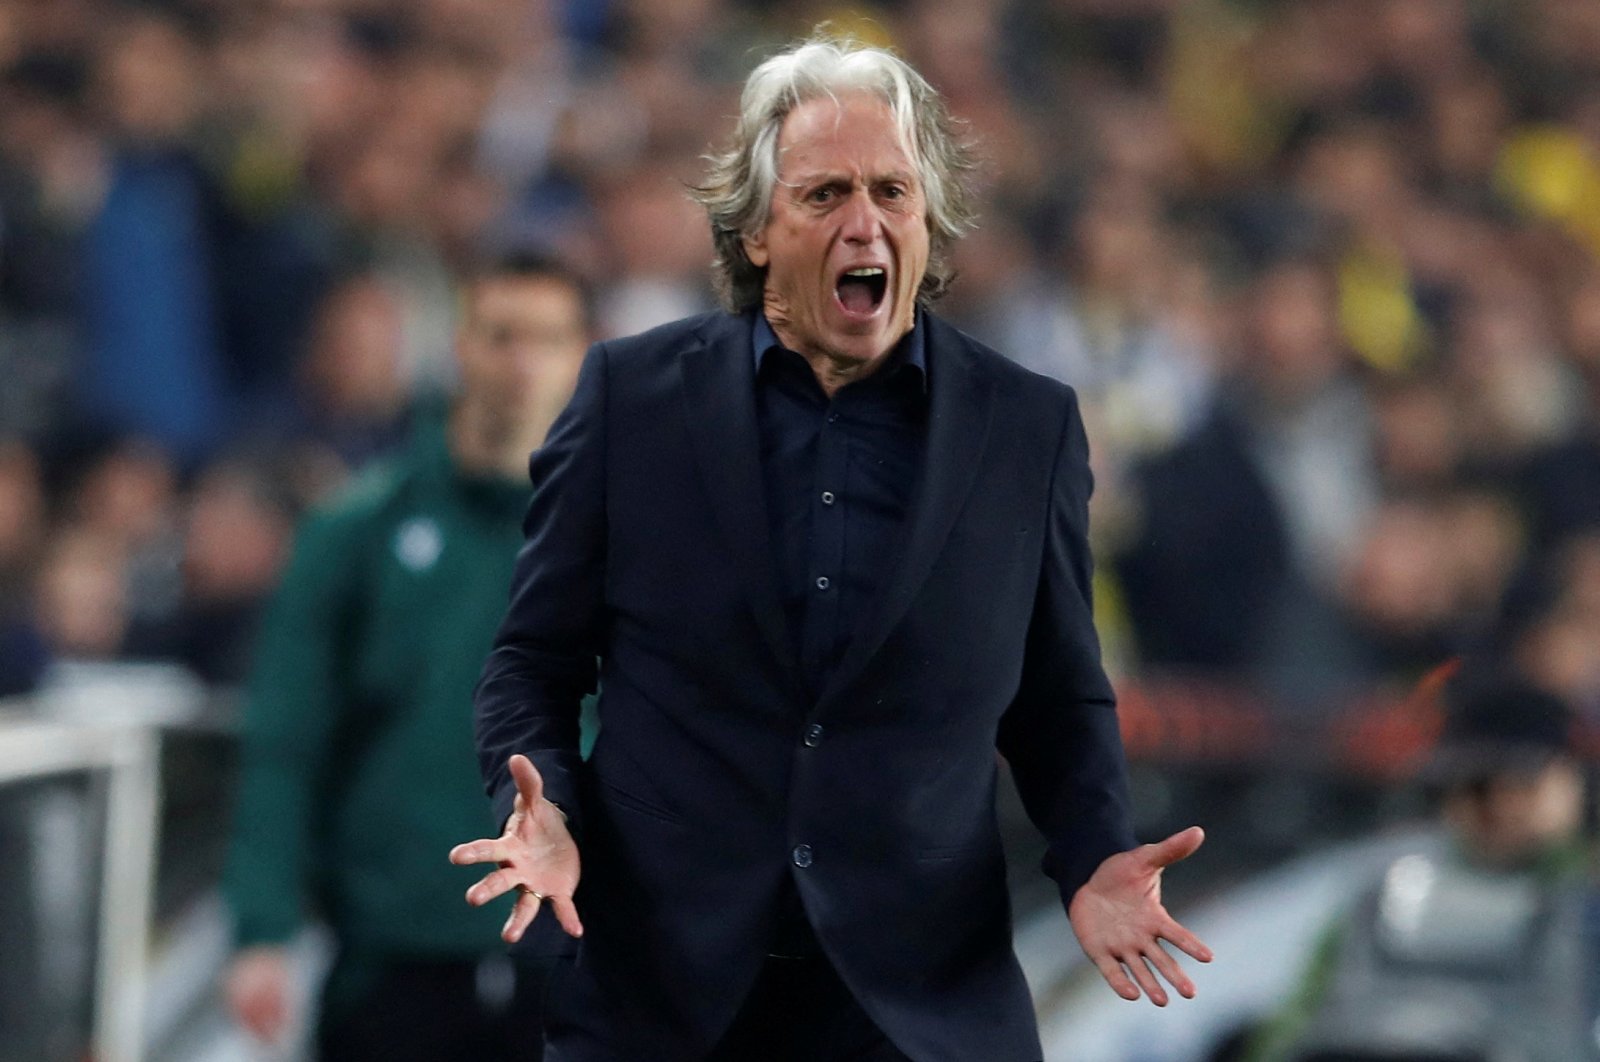 Then Fenerbahçe coach Jorge Jesus reacts during a match in Istanbul, Turkey, March 16, 2023. (Reuters Photo)